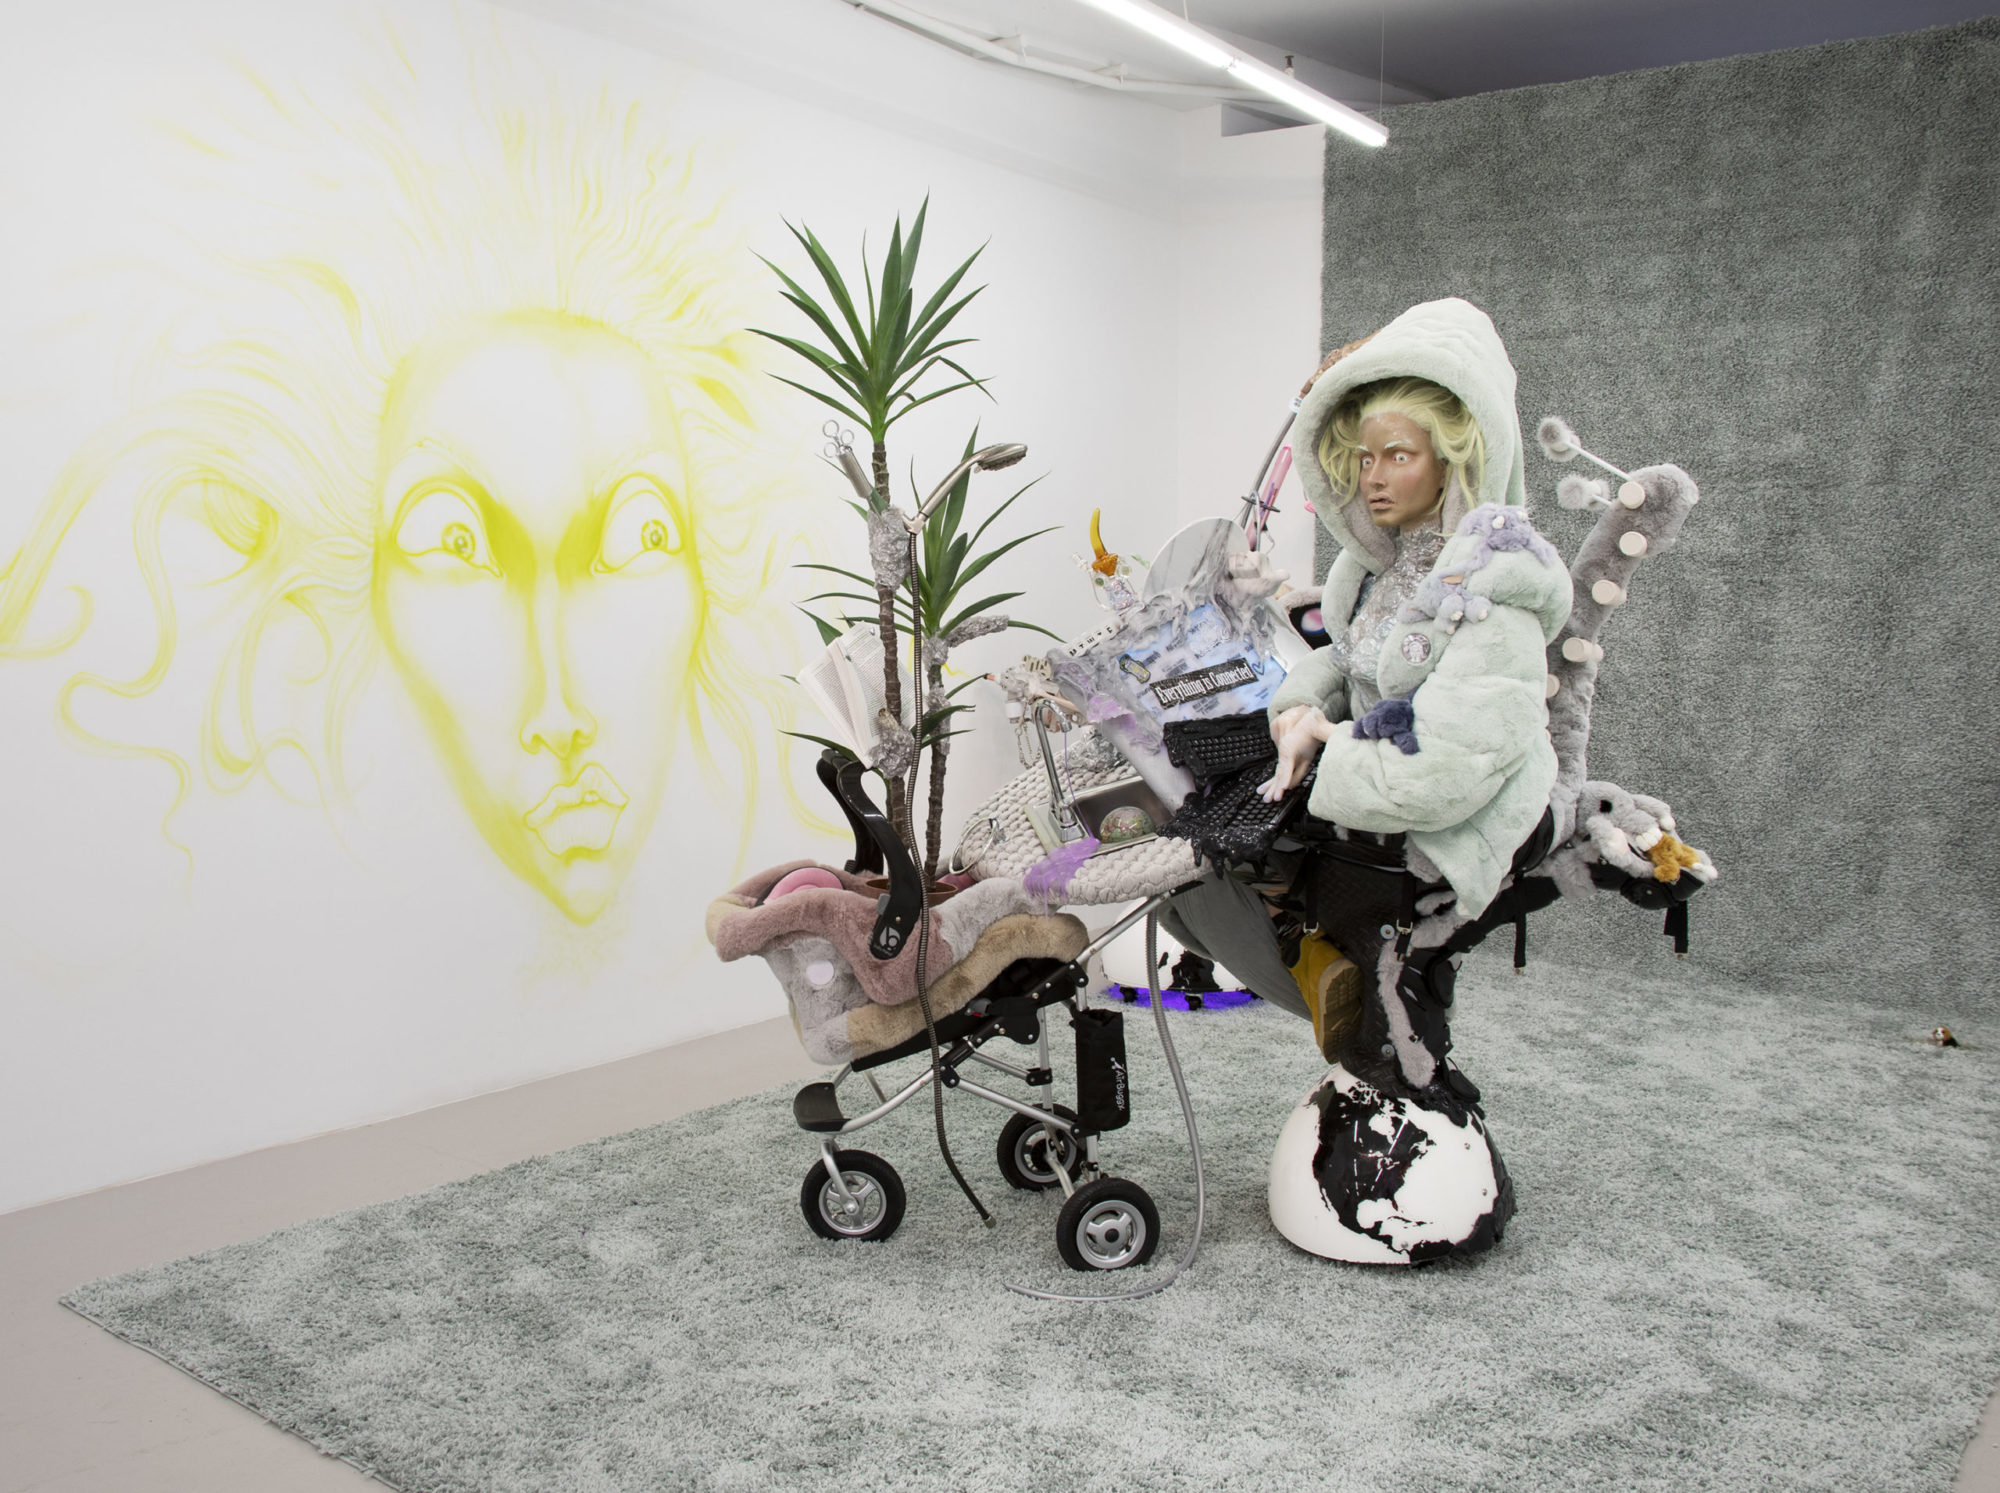 Silicone figure with wide eyes and bleach-blond hair sits with baby stroller against carpet backdrop. Figure wears faux fur jacket and is surrounded by items including a shower head, globe, and stuffed animals